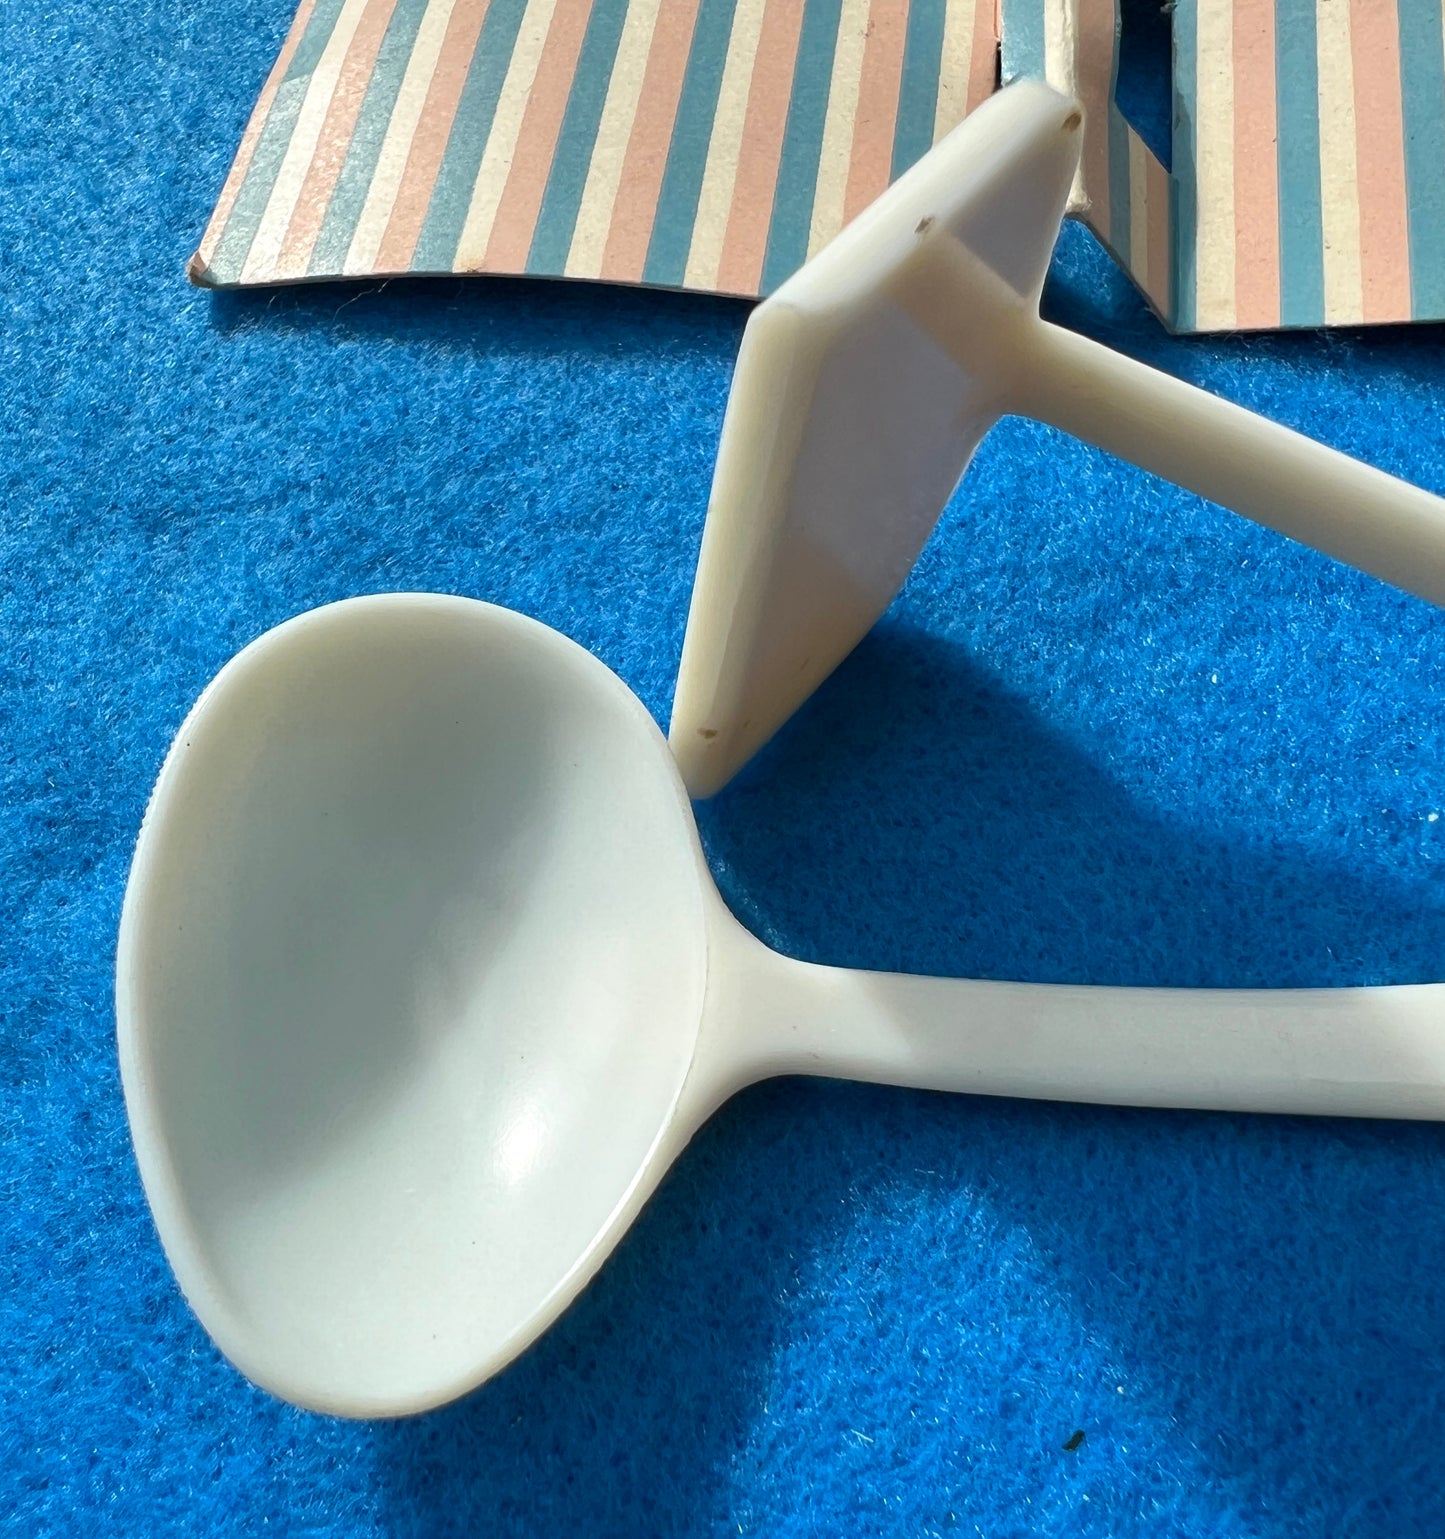 Vintage BEX Baby's Spoon and Pusher Set